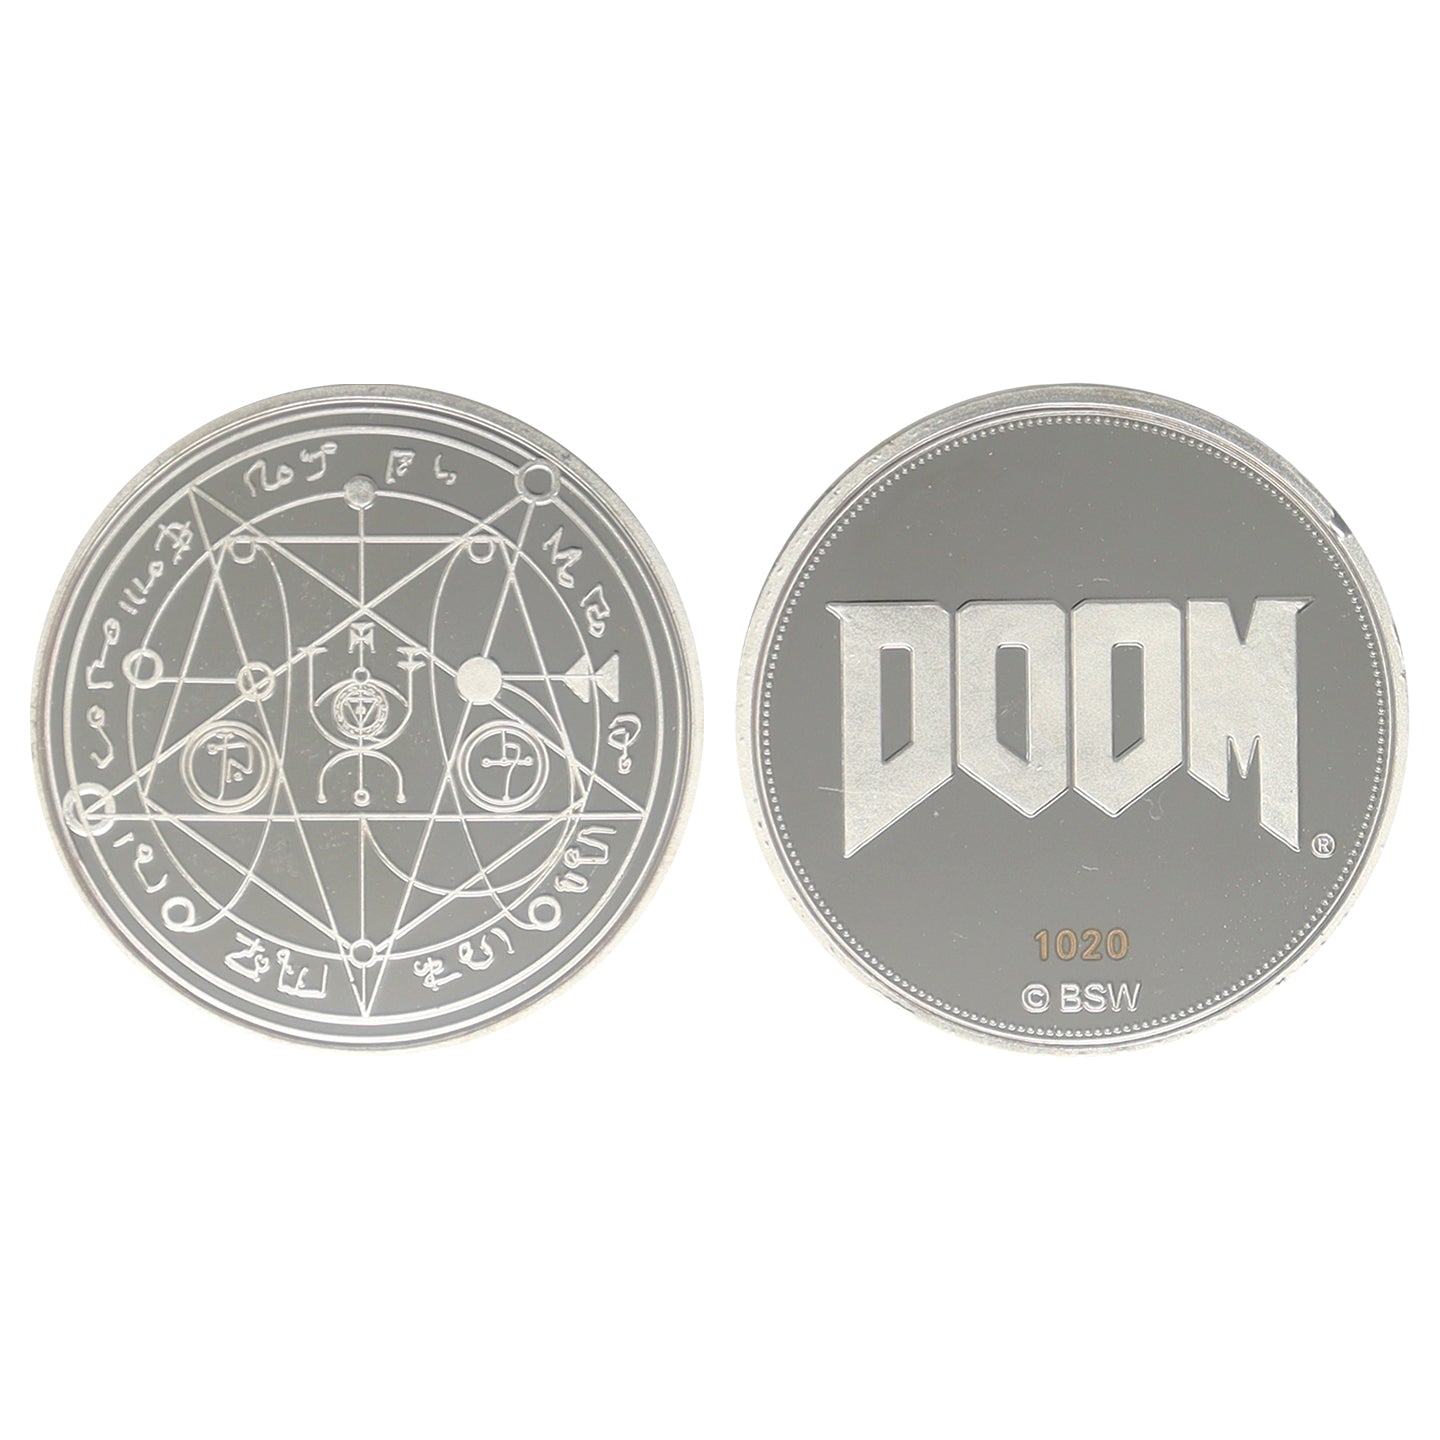 DOOM 25th Anniversary Collectible Coin